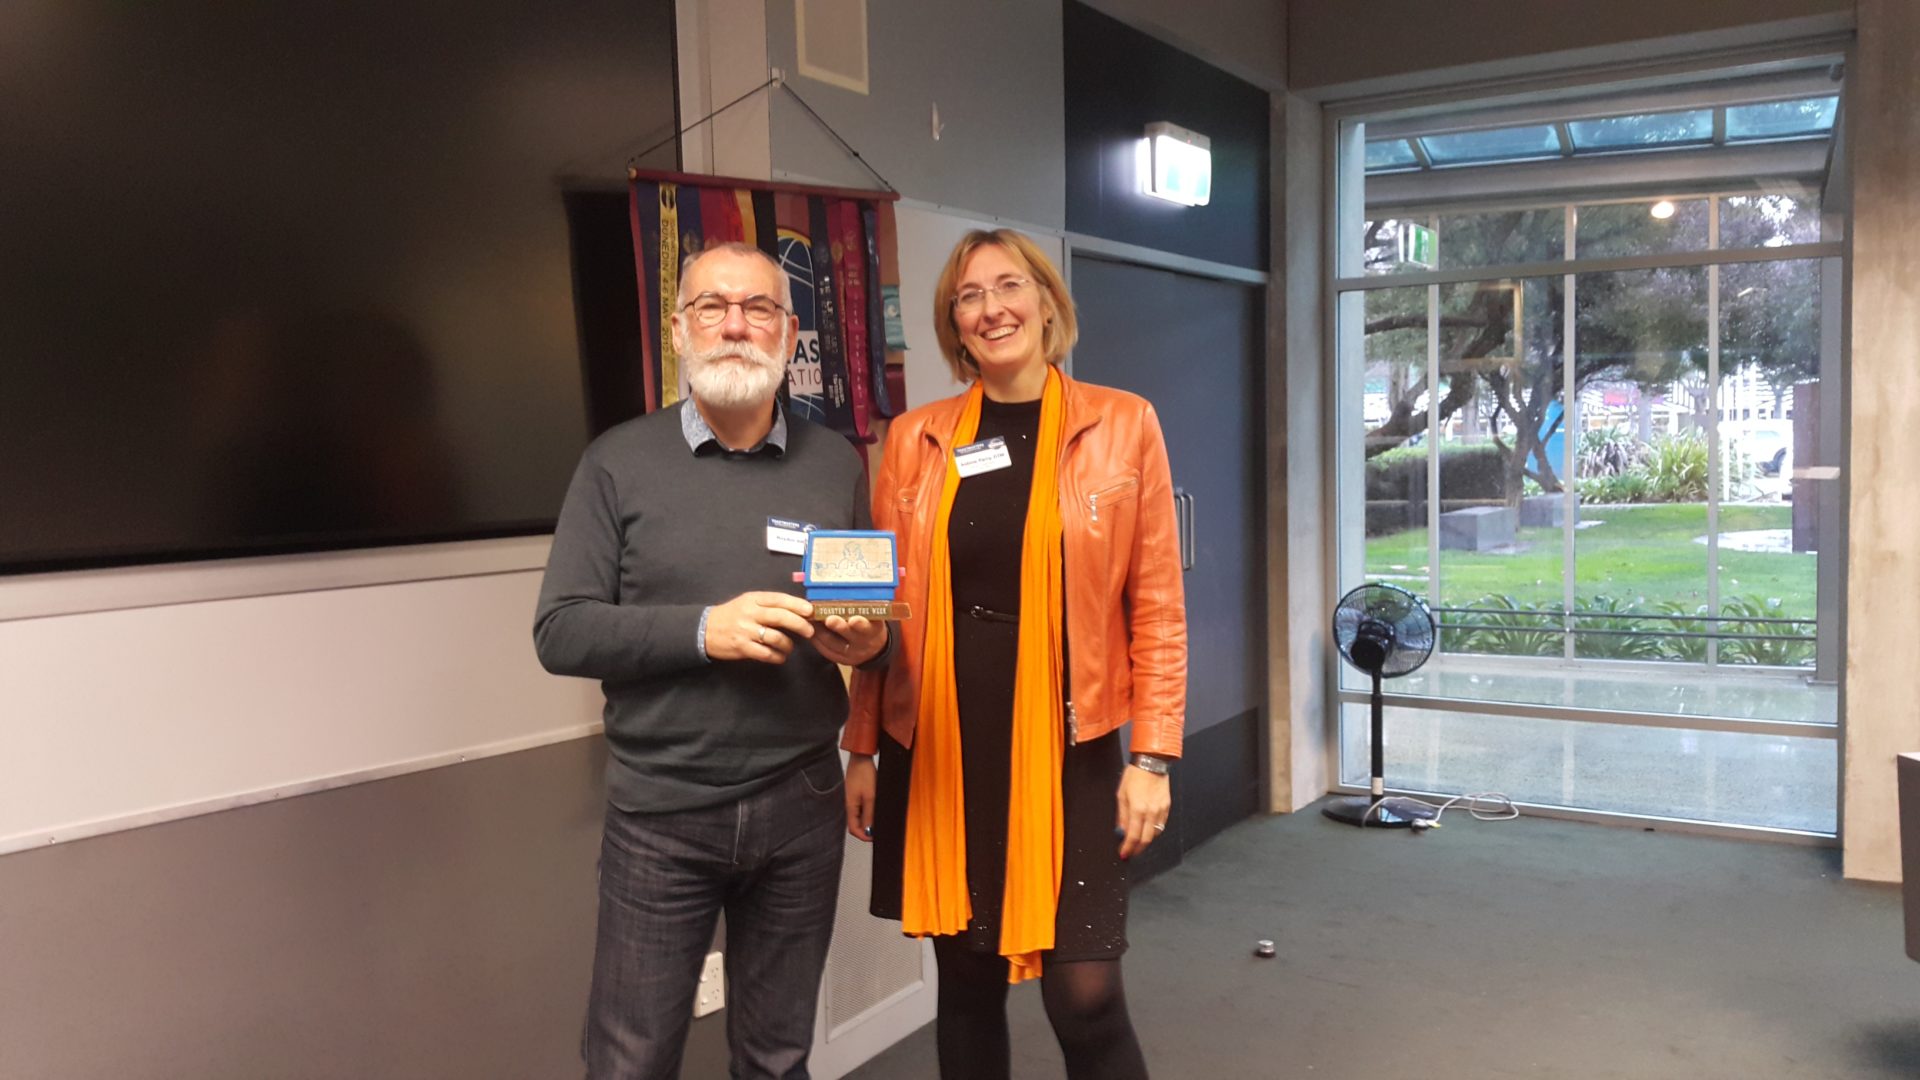 Toastmaster of the week receiving the Toastie award from another member, both smiling at the camera